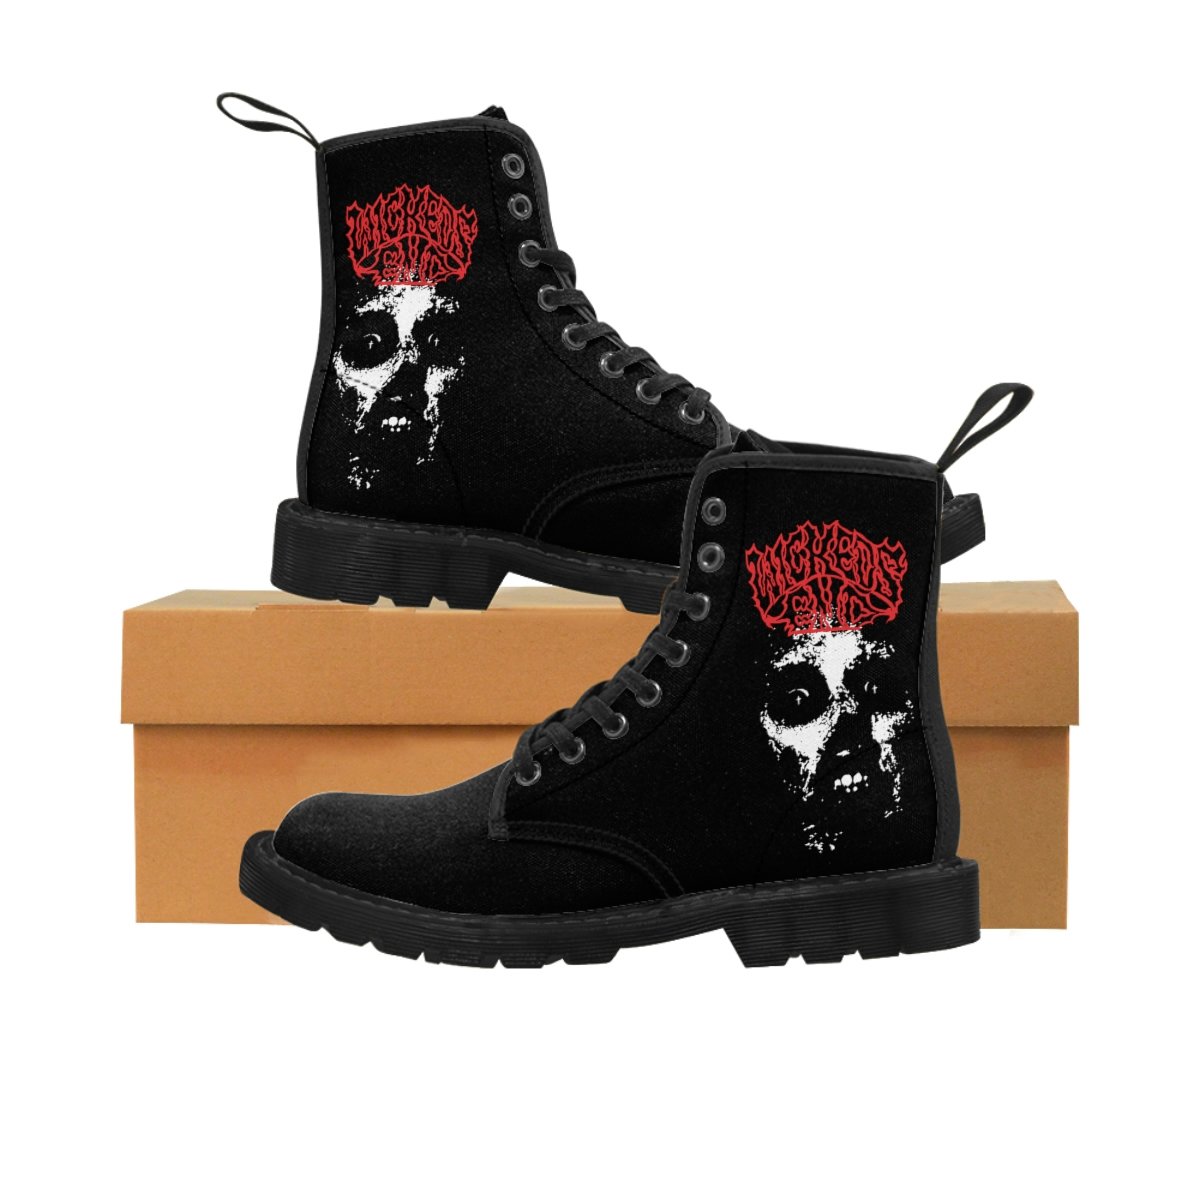 Wickeds End – Zombie Girl Canvas Boots